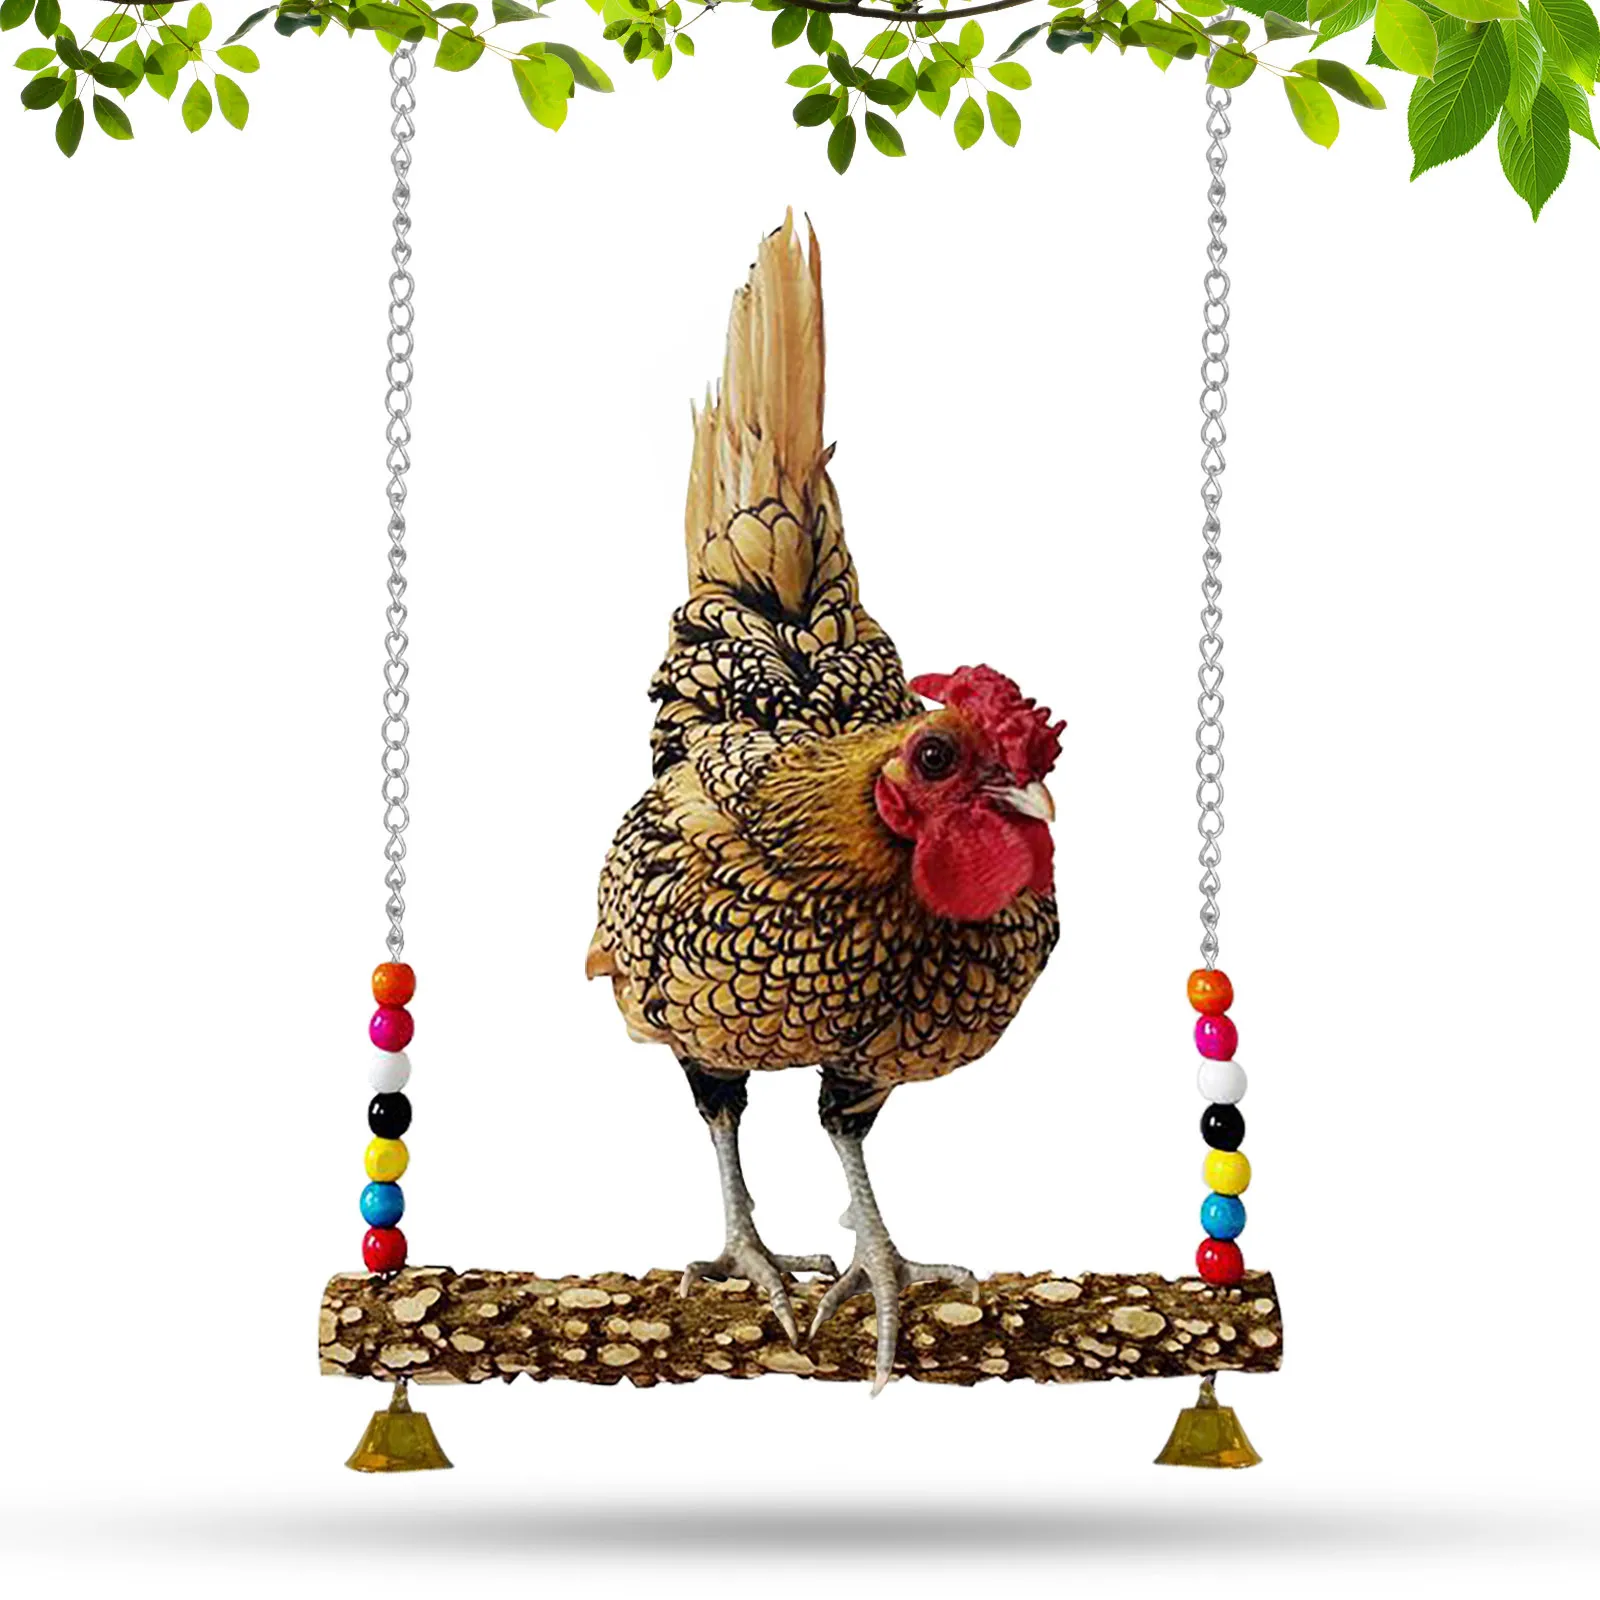 Mayzj Chicken Swing Wood Ladder Toys for Chicks Rooster Hens Birds Parrots with Extra Long Chain 